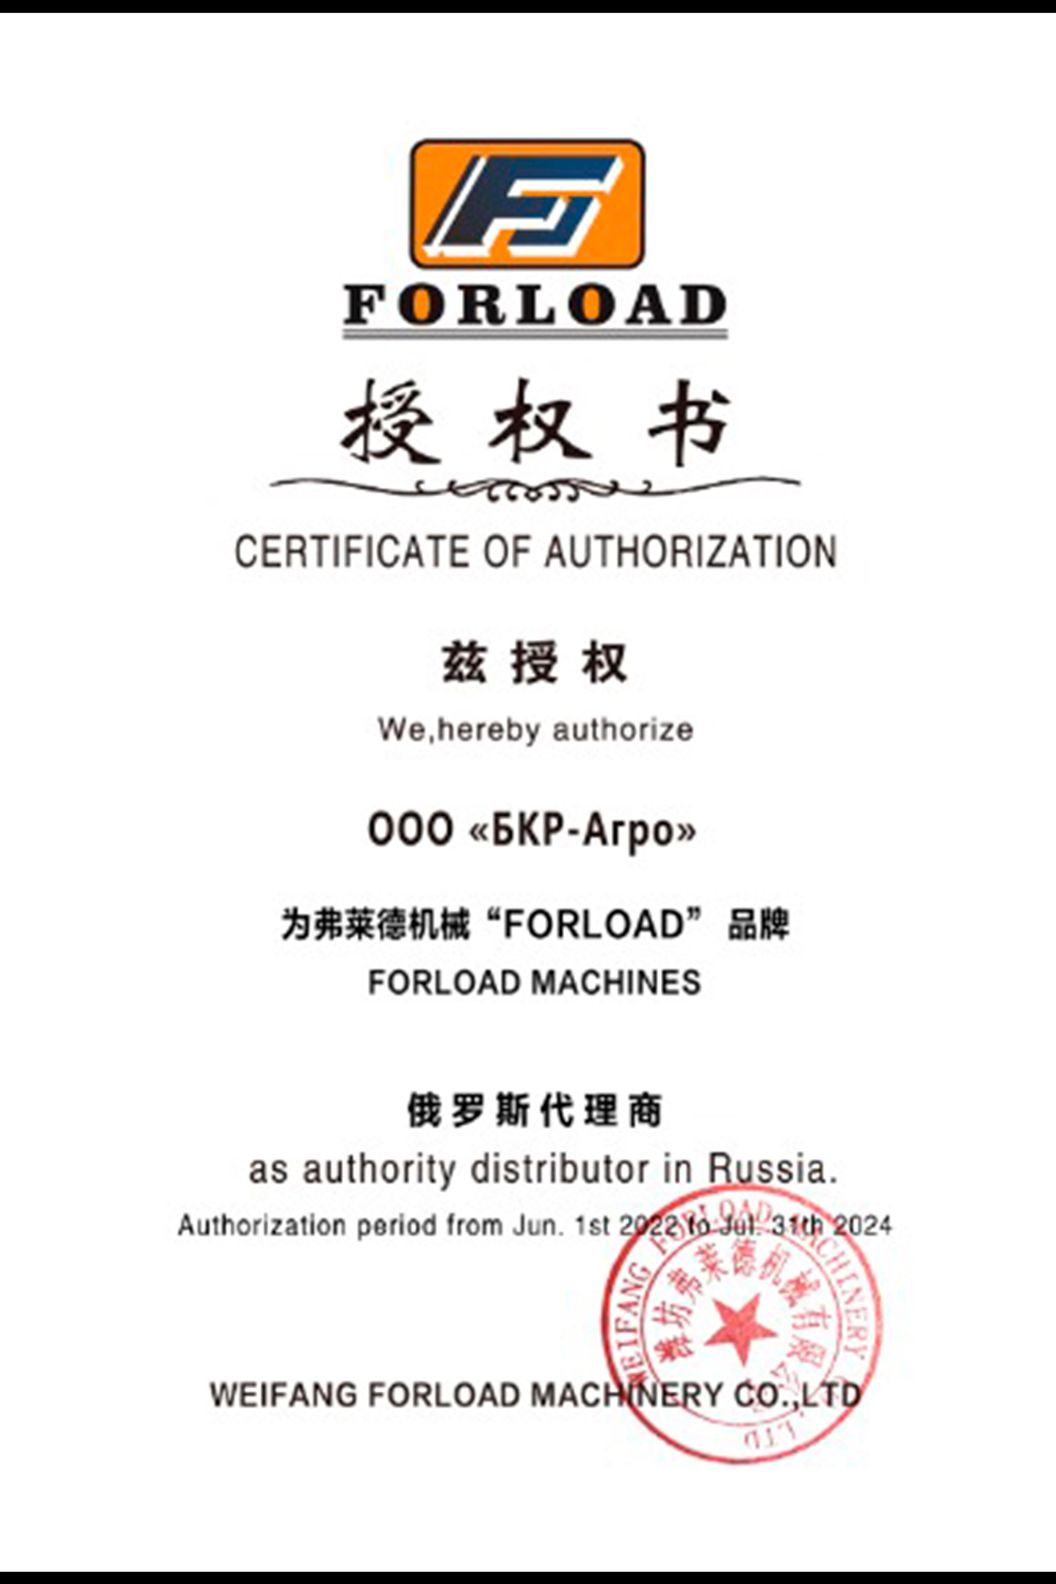 ЗАВОД WEIFANG FORLOAD MACHINERY COMPANY LIMITED